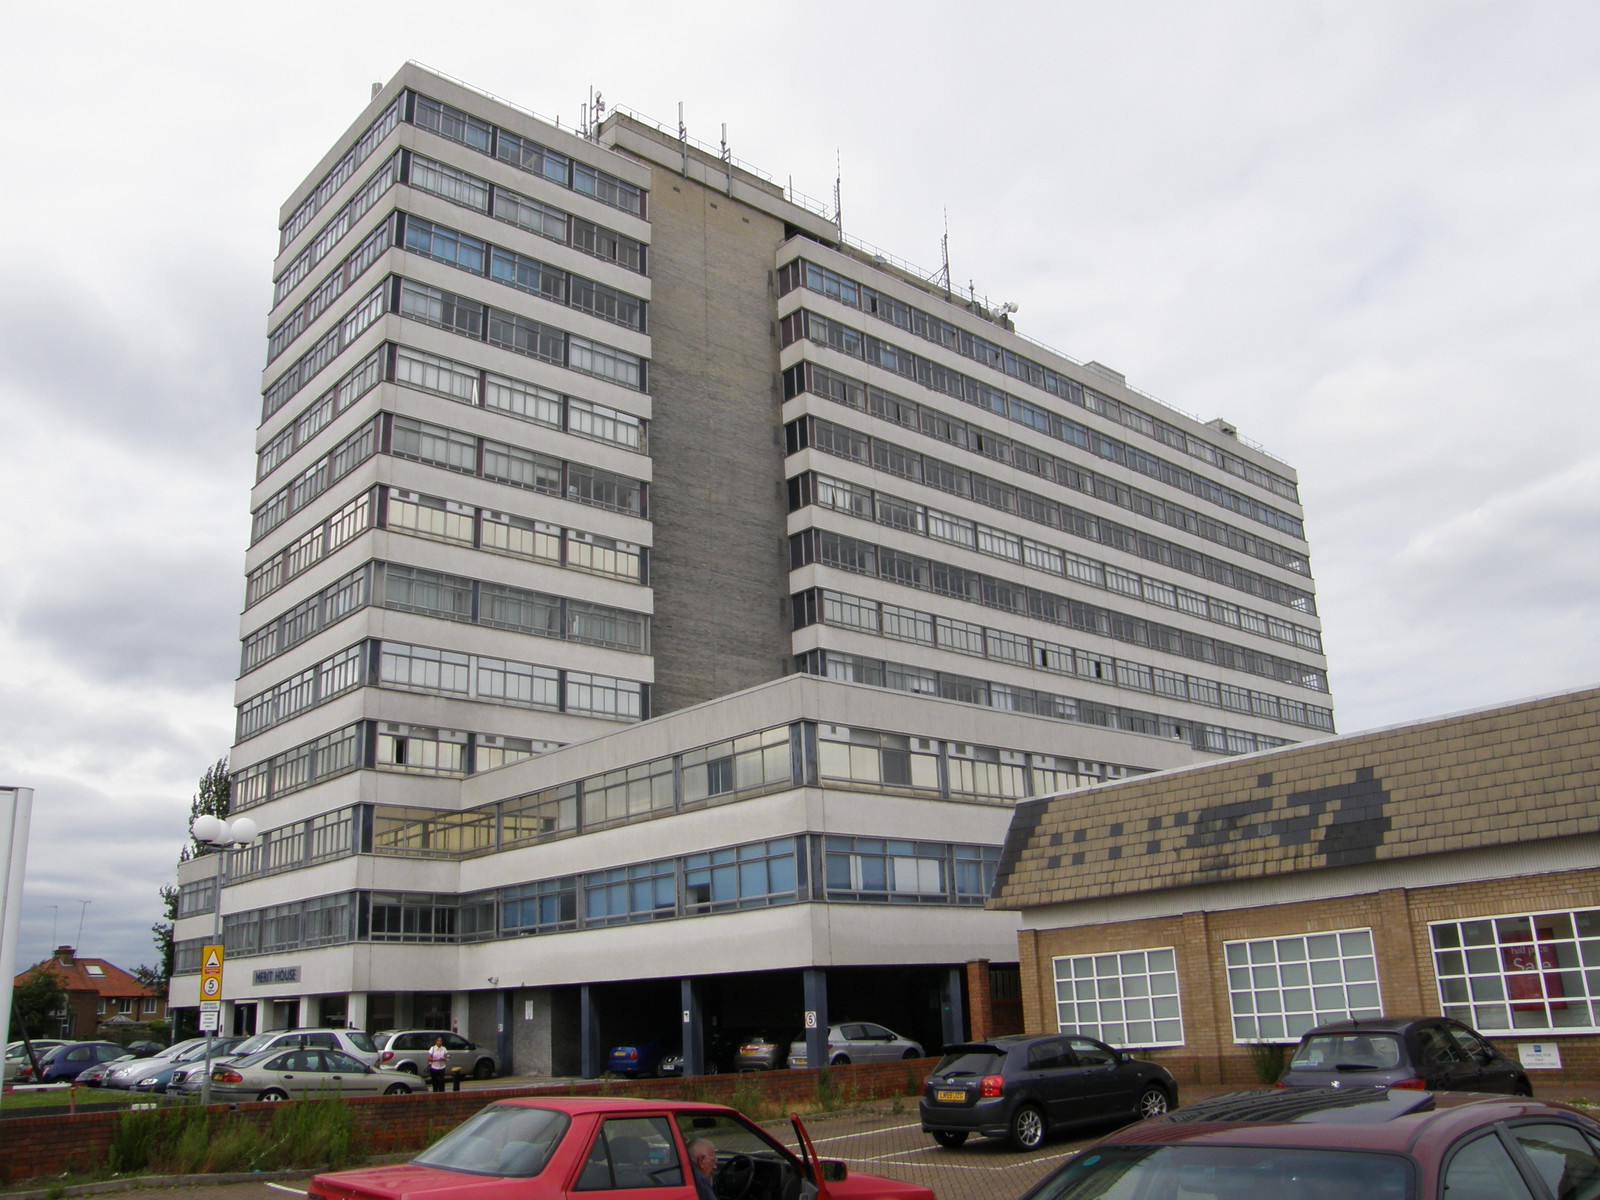 The office tower that looms over the industrial parks of Colindale